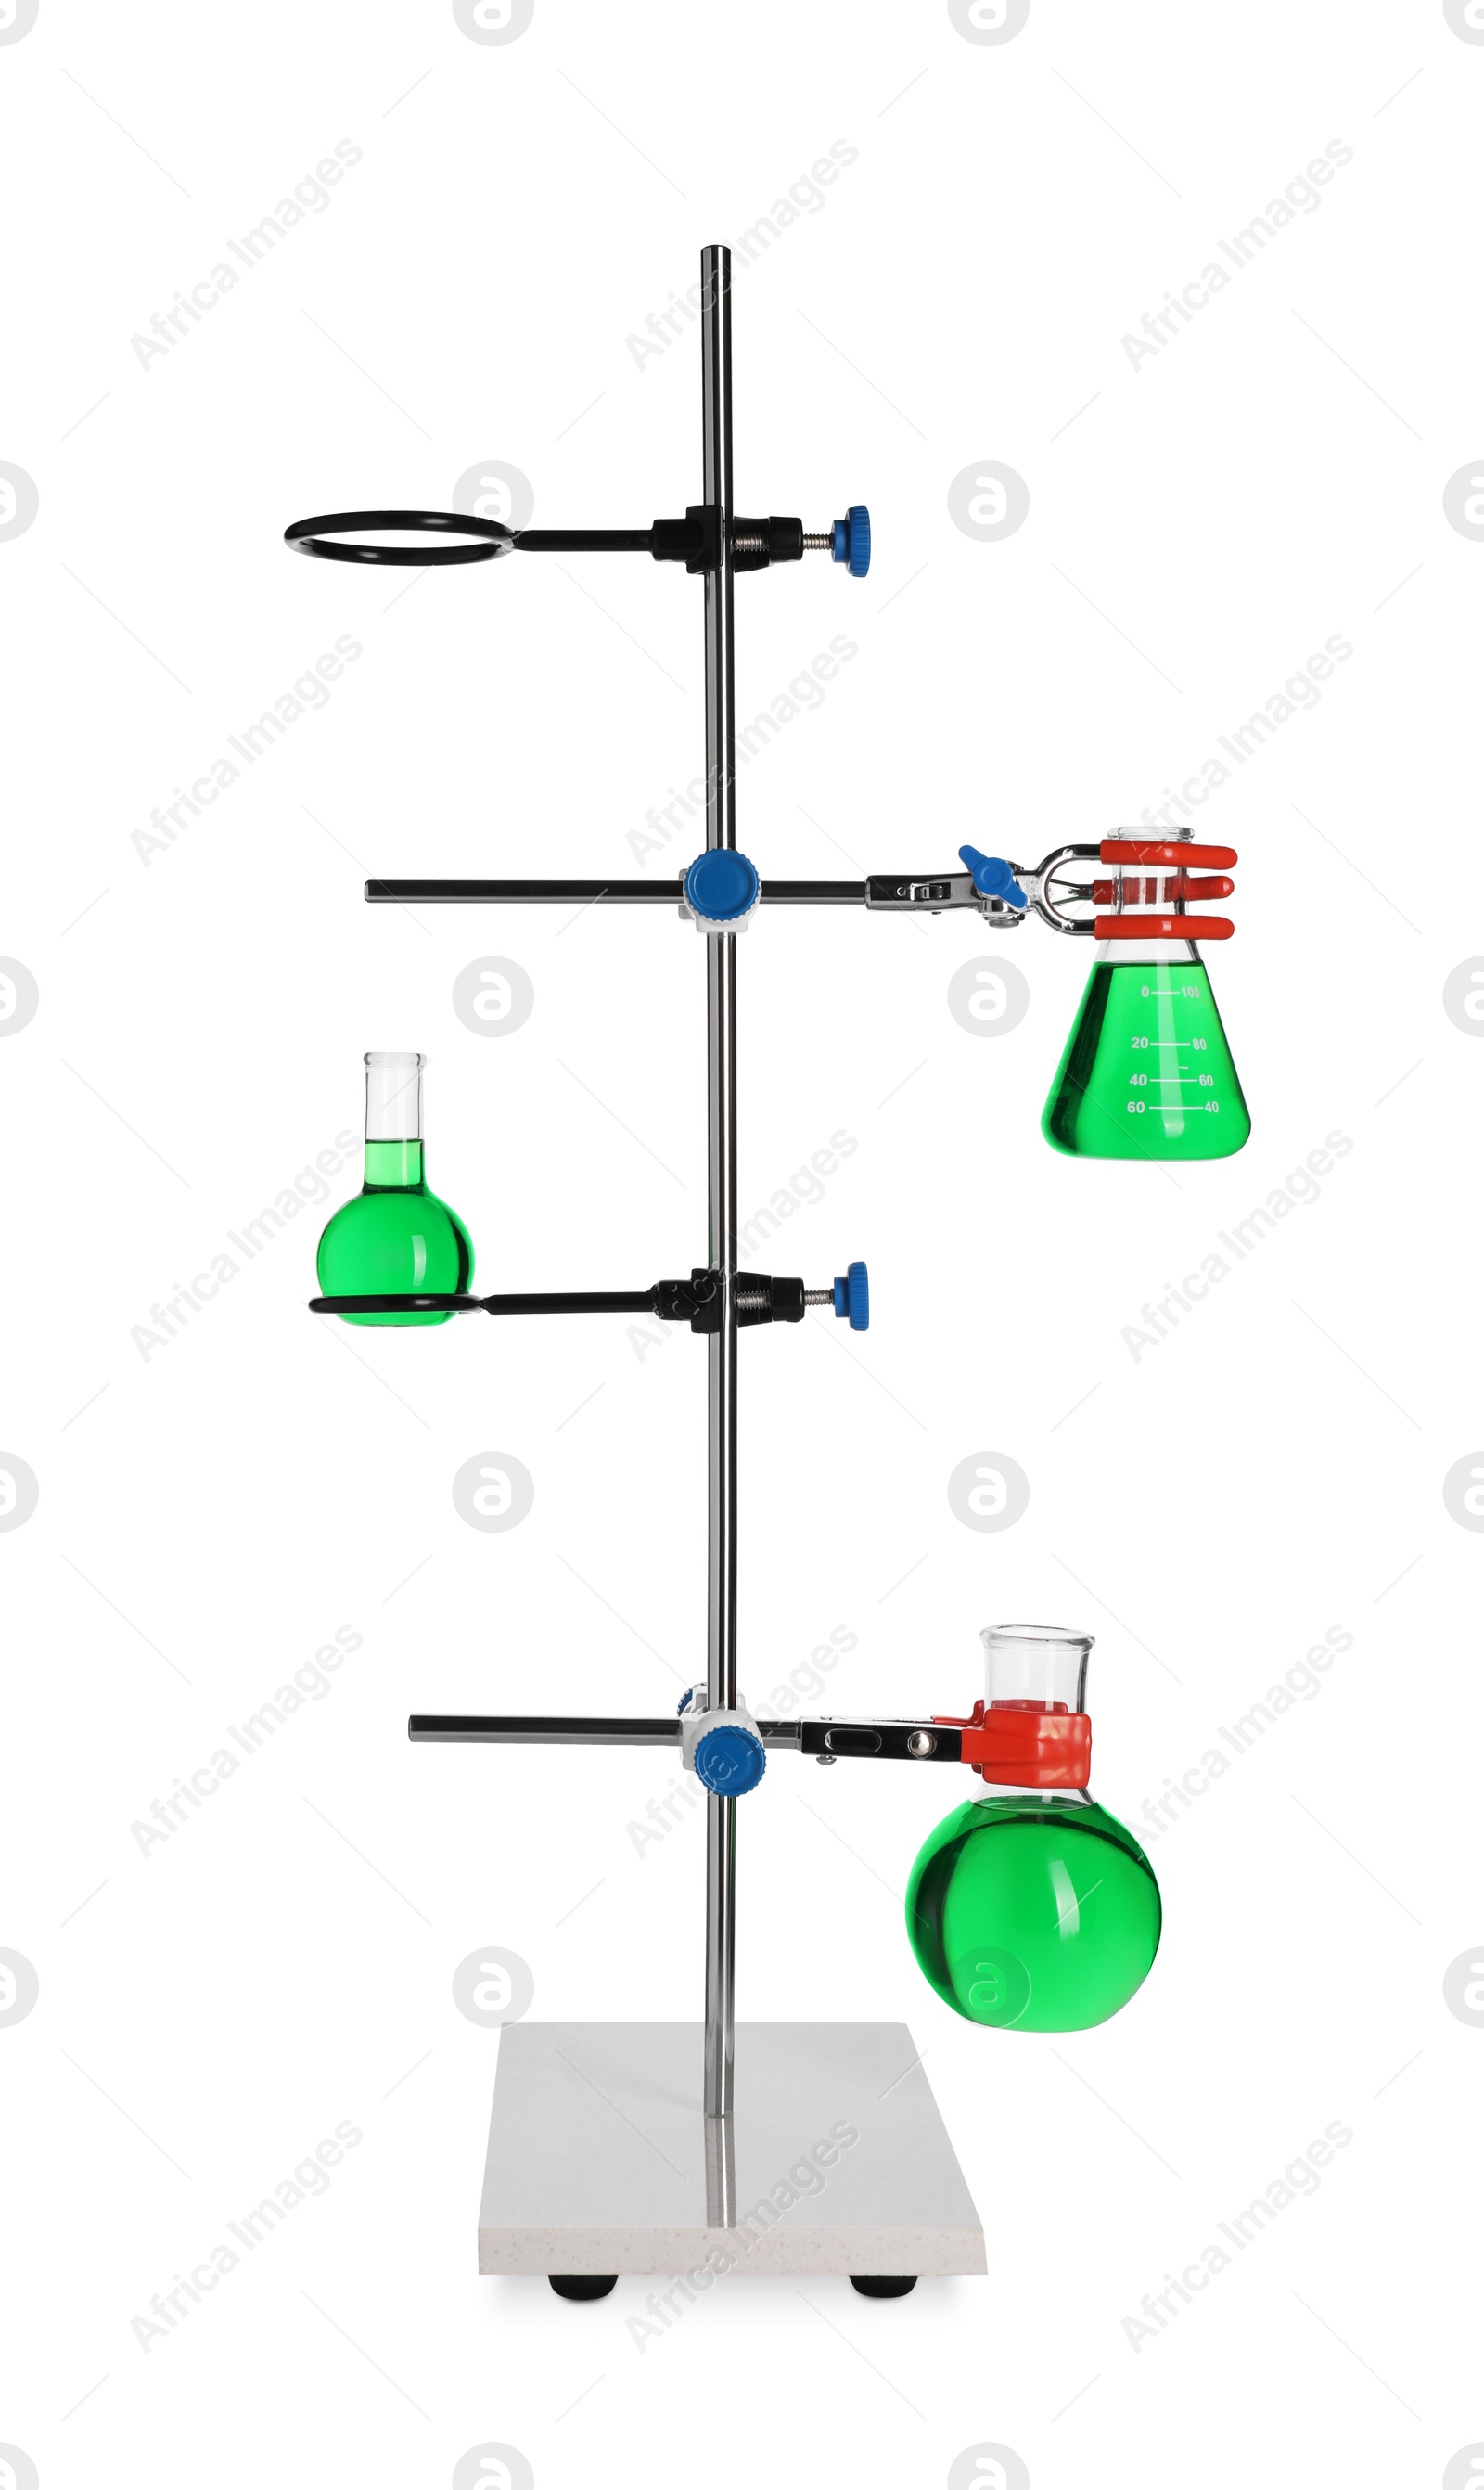 Photo of Retort stand with flasks of green liquid isolated on white